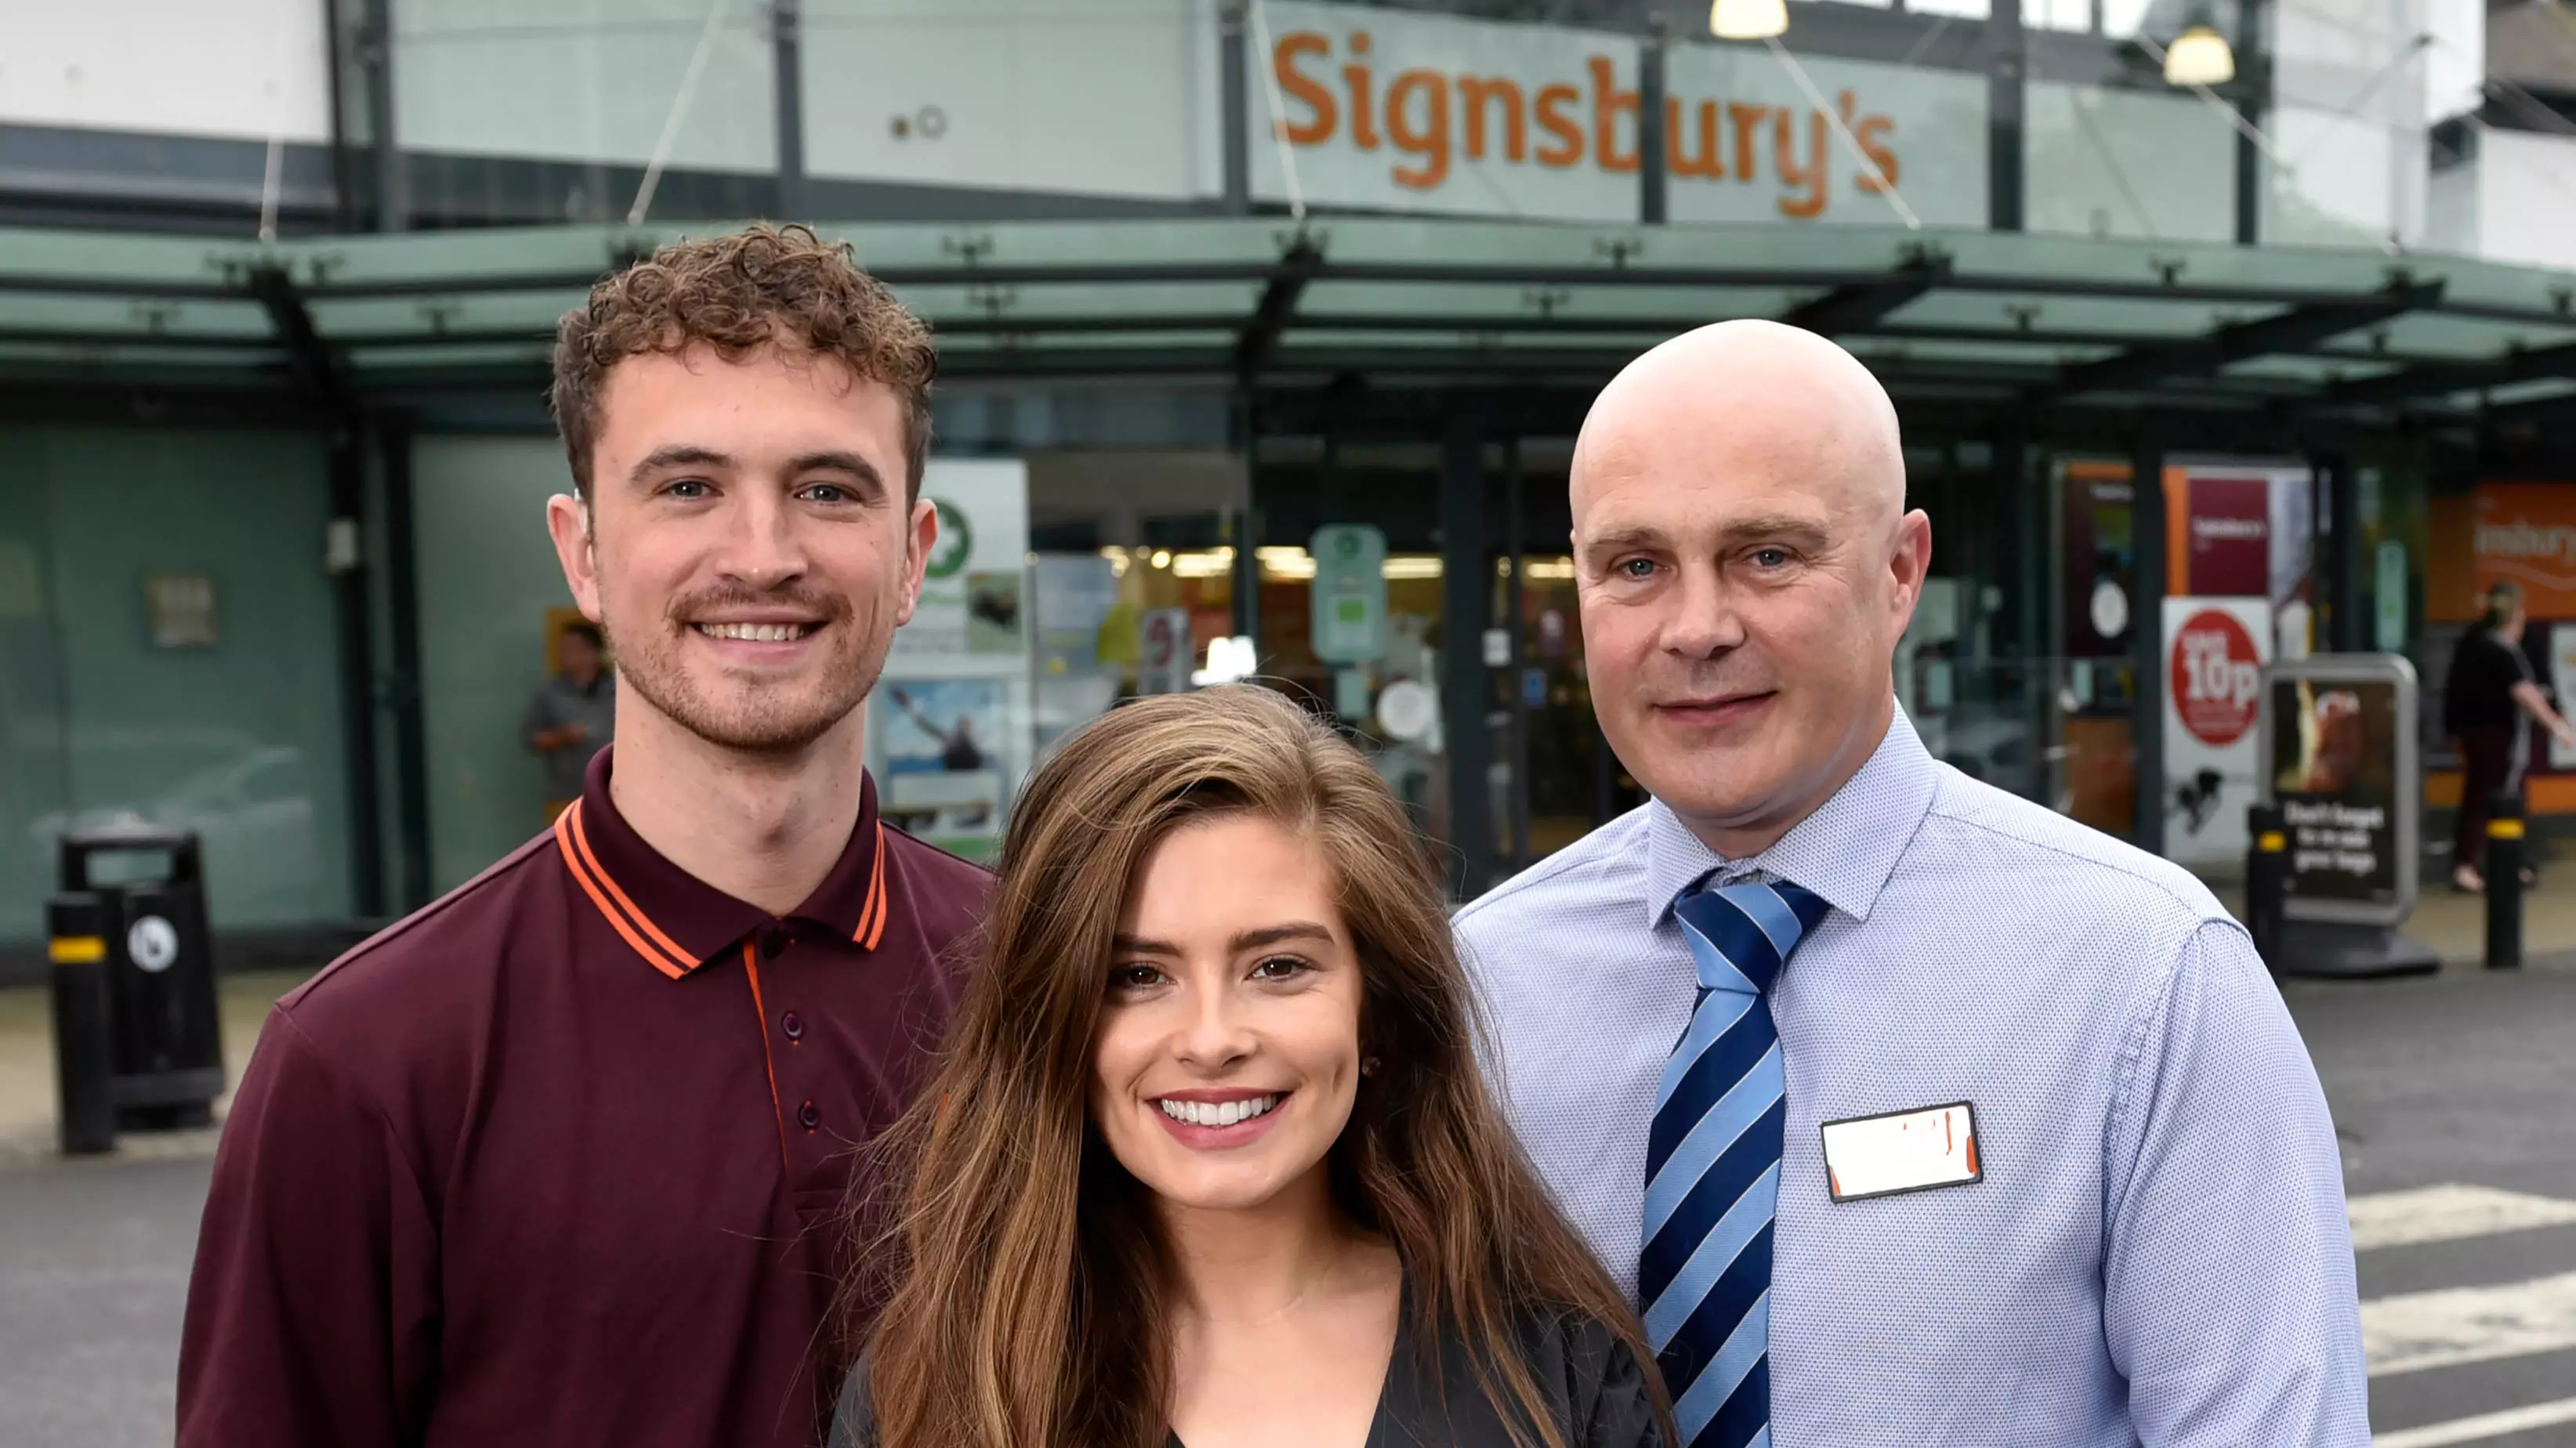 Sainsbury's Unveils 'Signsbury's' - The UK's First Sign Language Store 